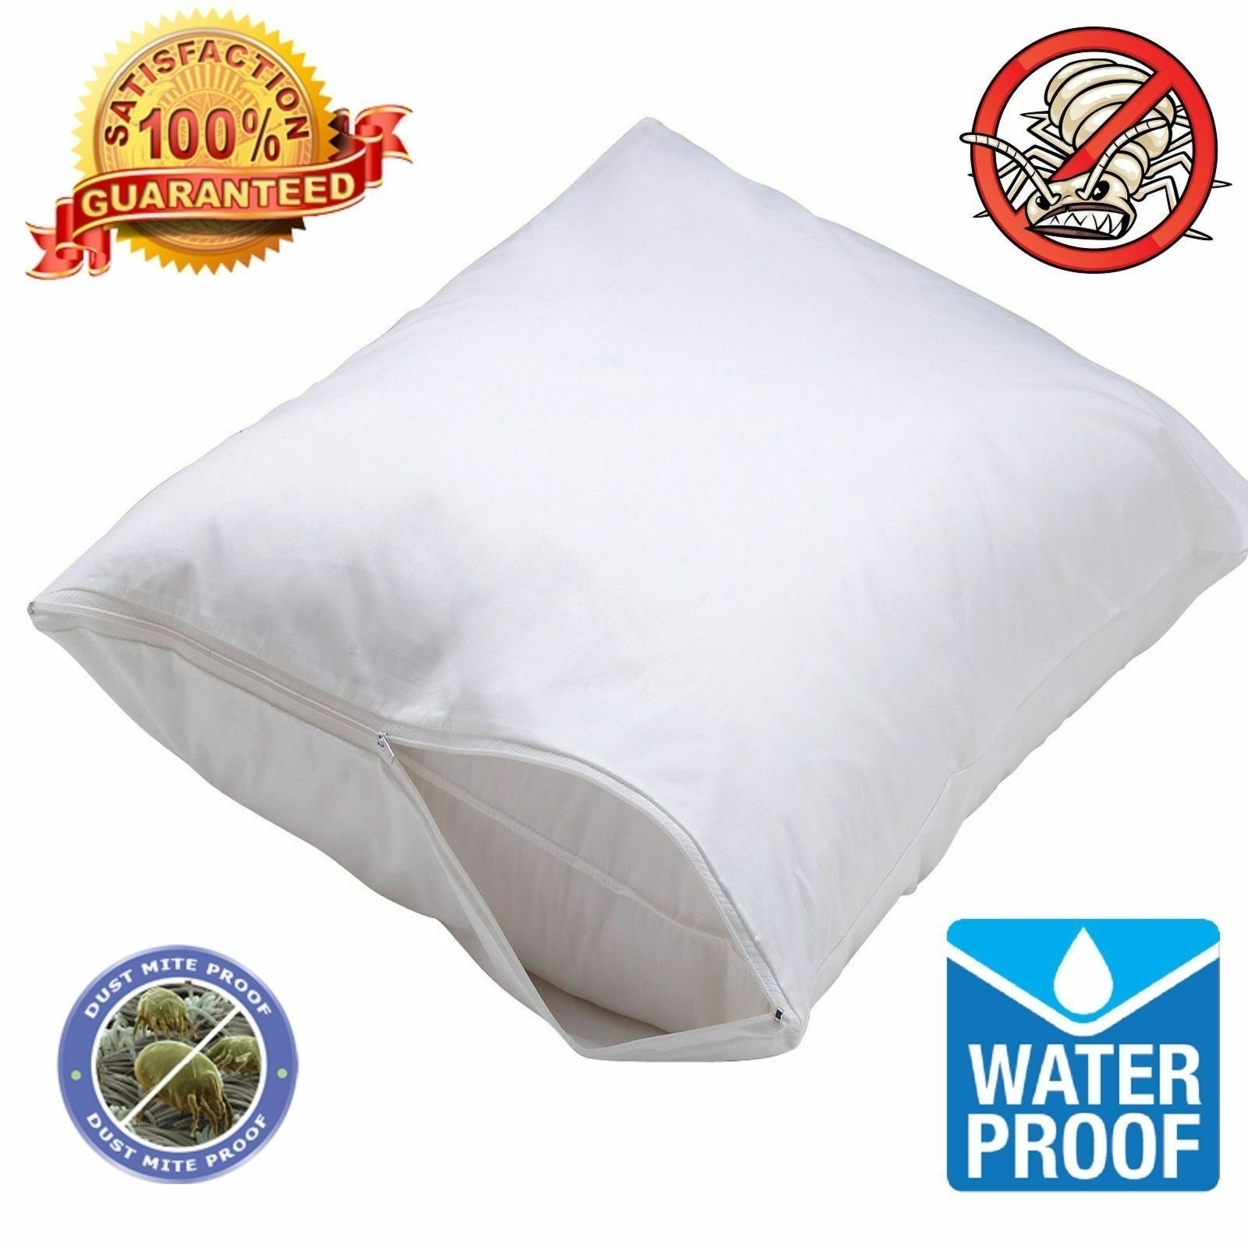 Zippered Fabric Waterproof & Bed Bug/Dust Mite Mattress Cover Protector - King